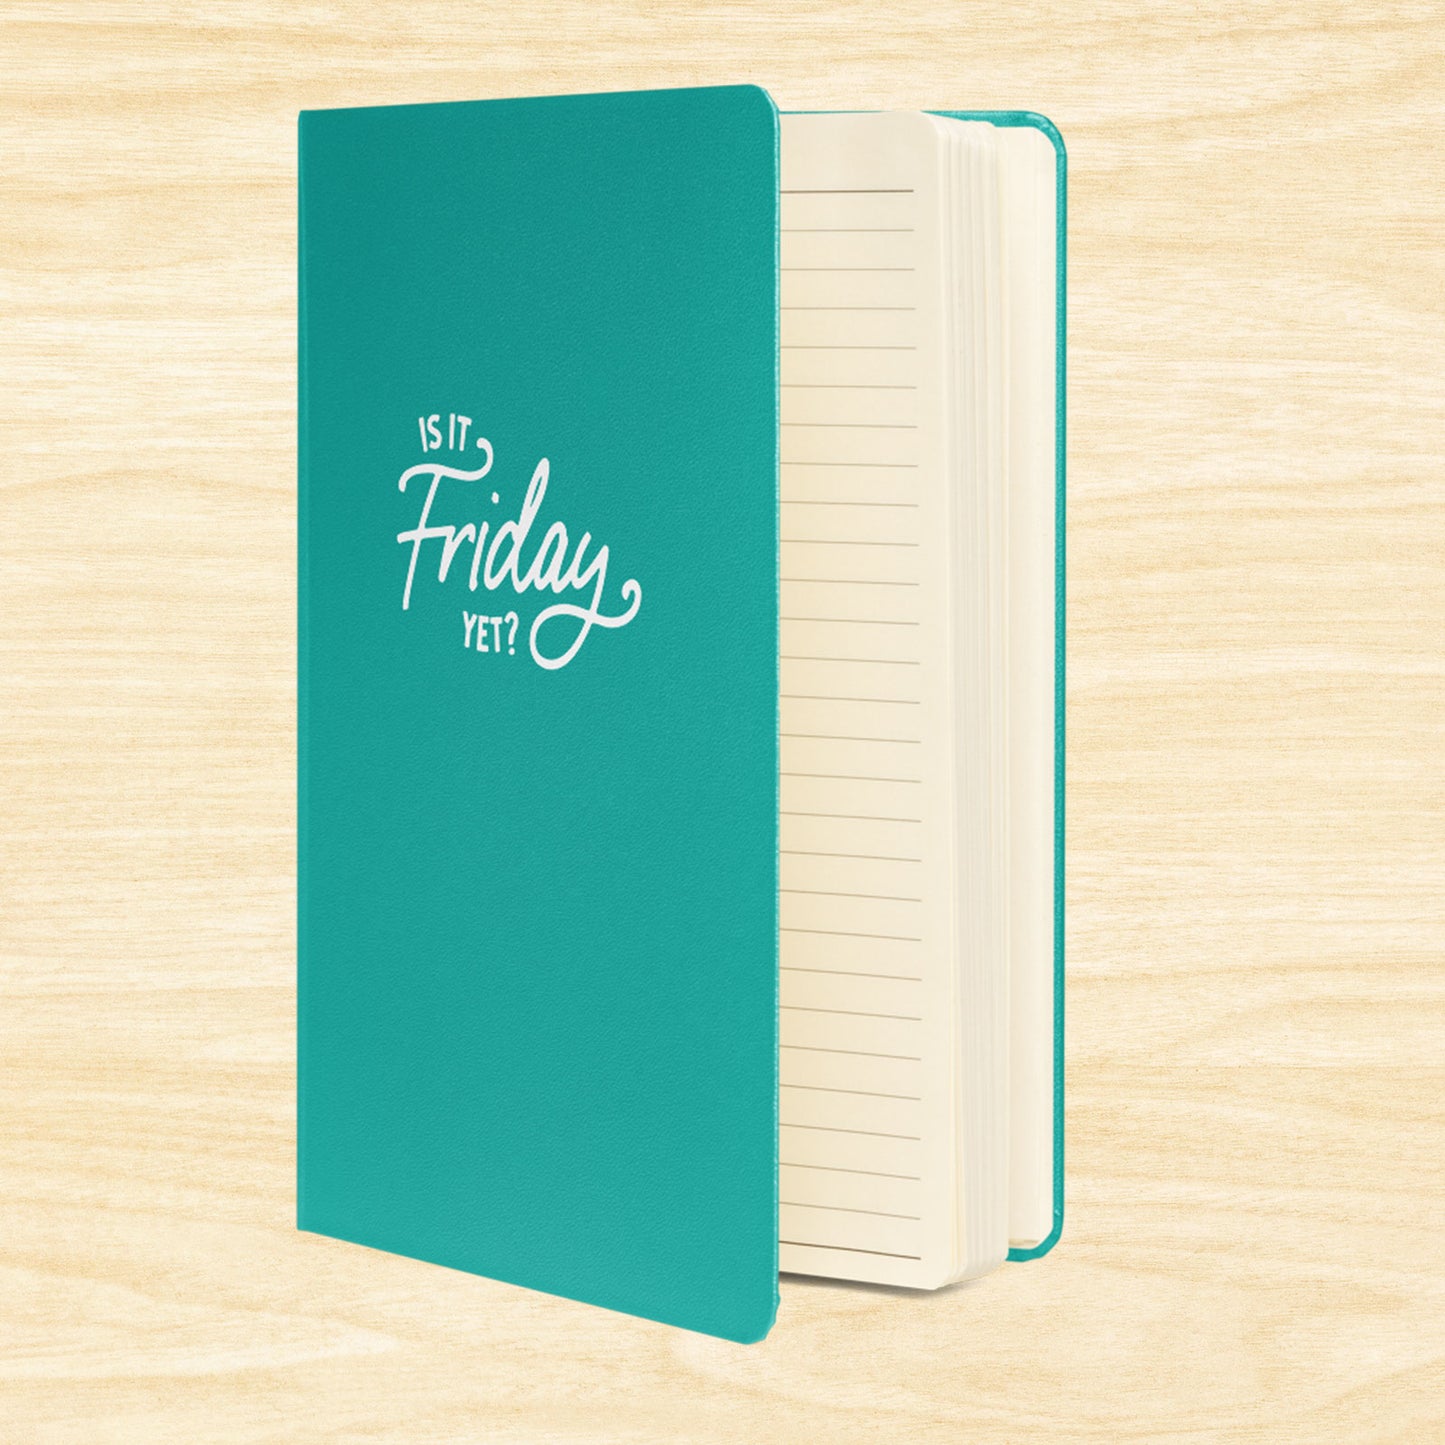 Is It Friday Yet? Hardcover Notebook